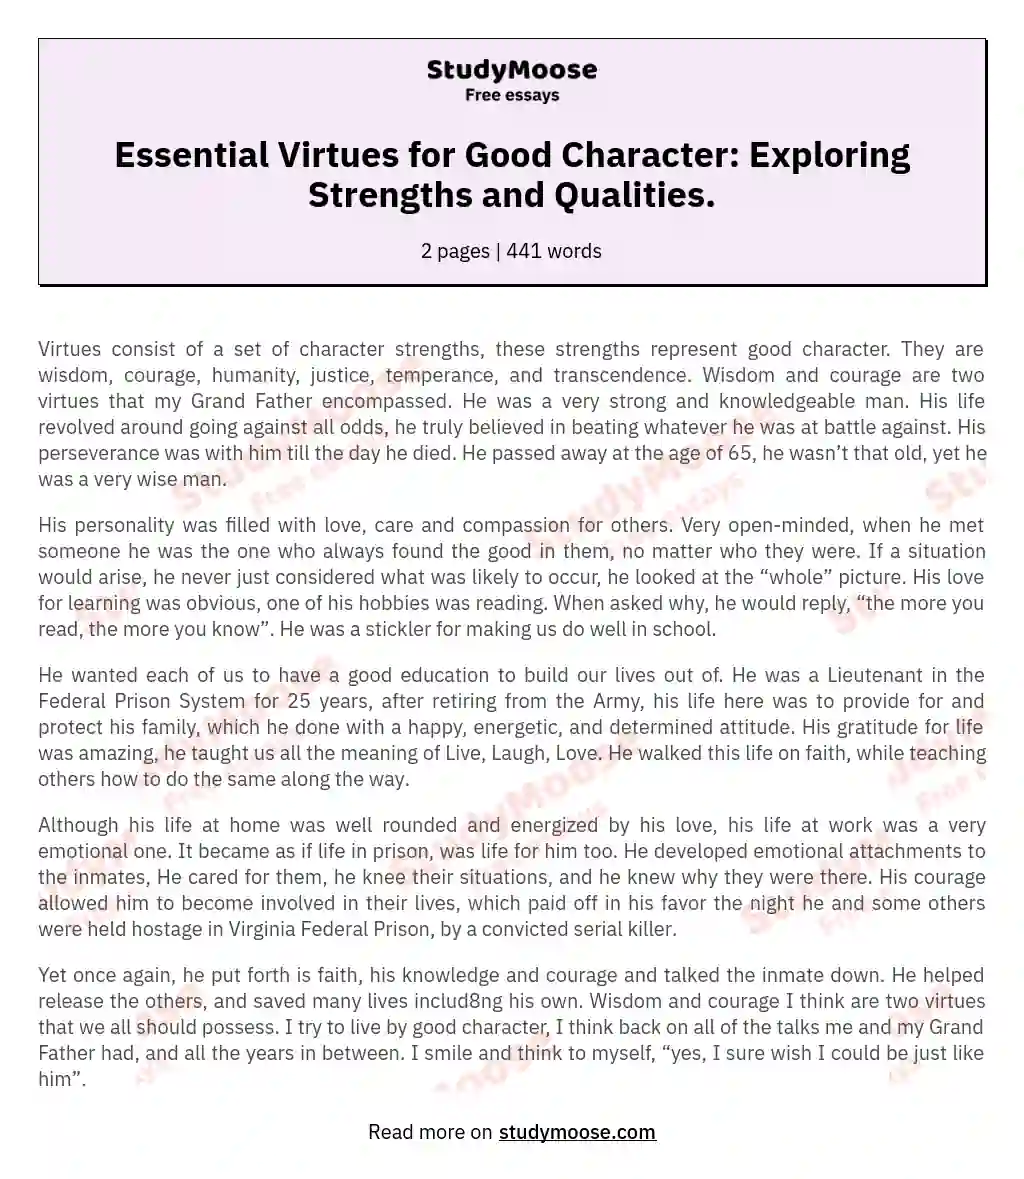 Essential Virtues for Good Character: Exploring Strengths and Qualities. essay